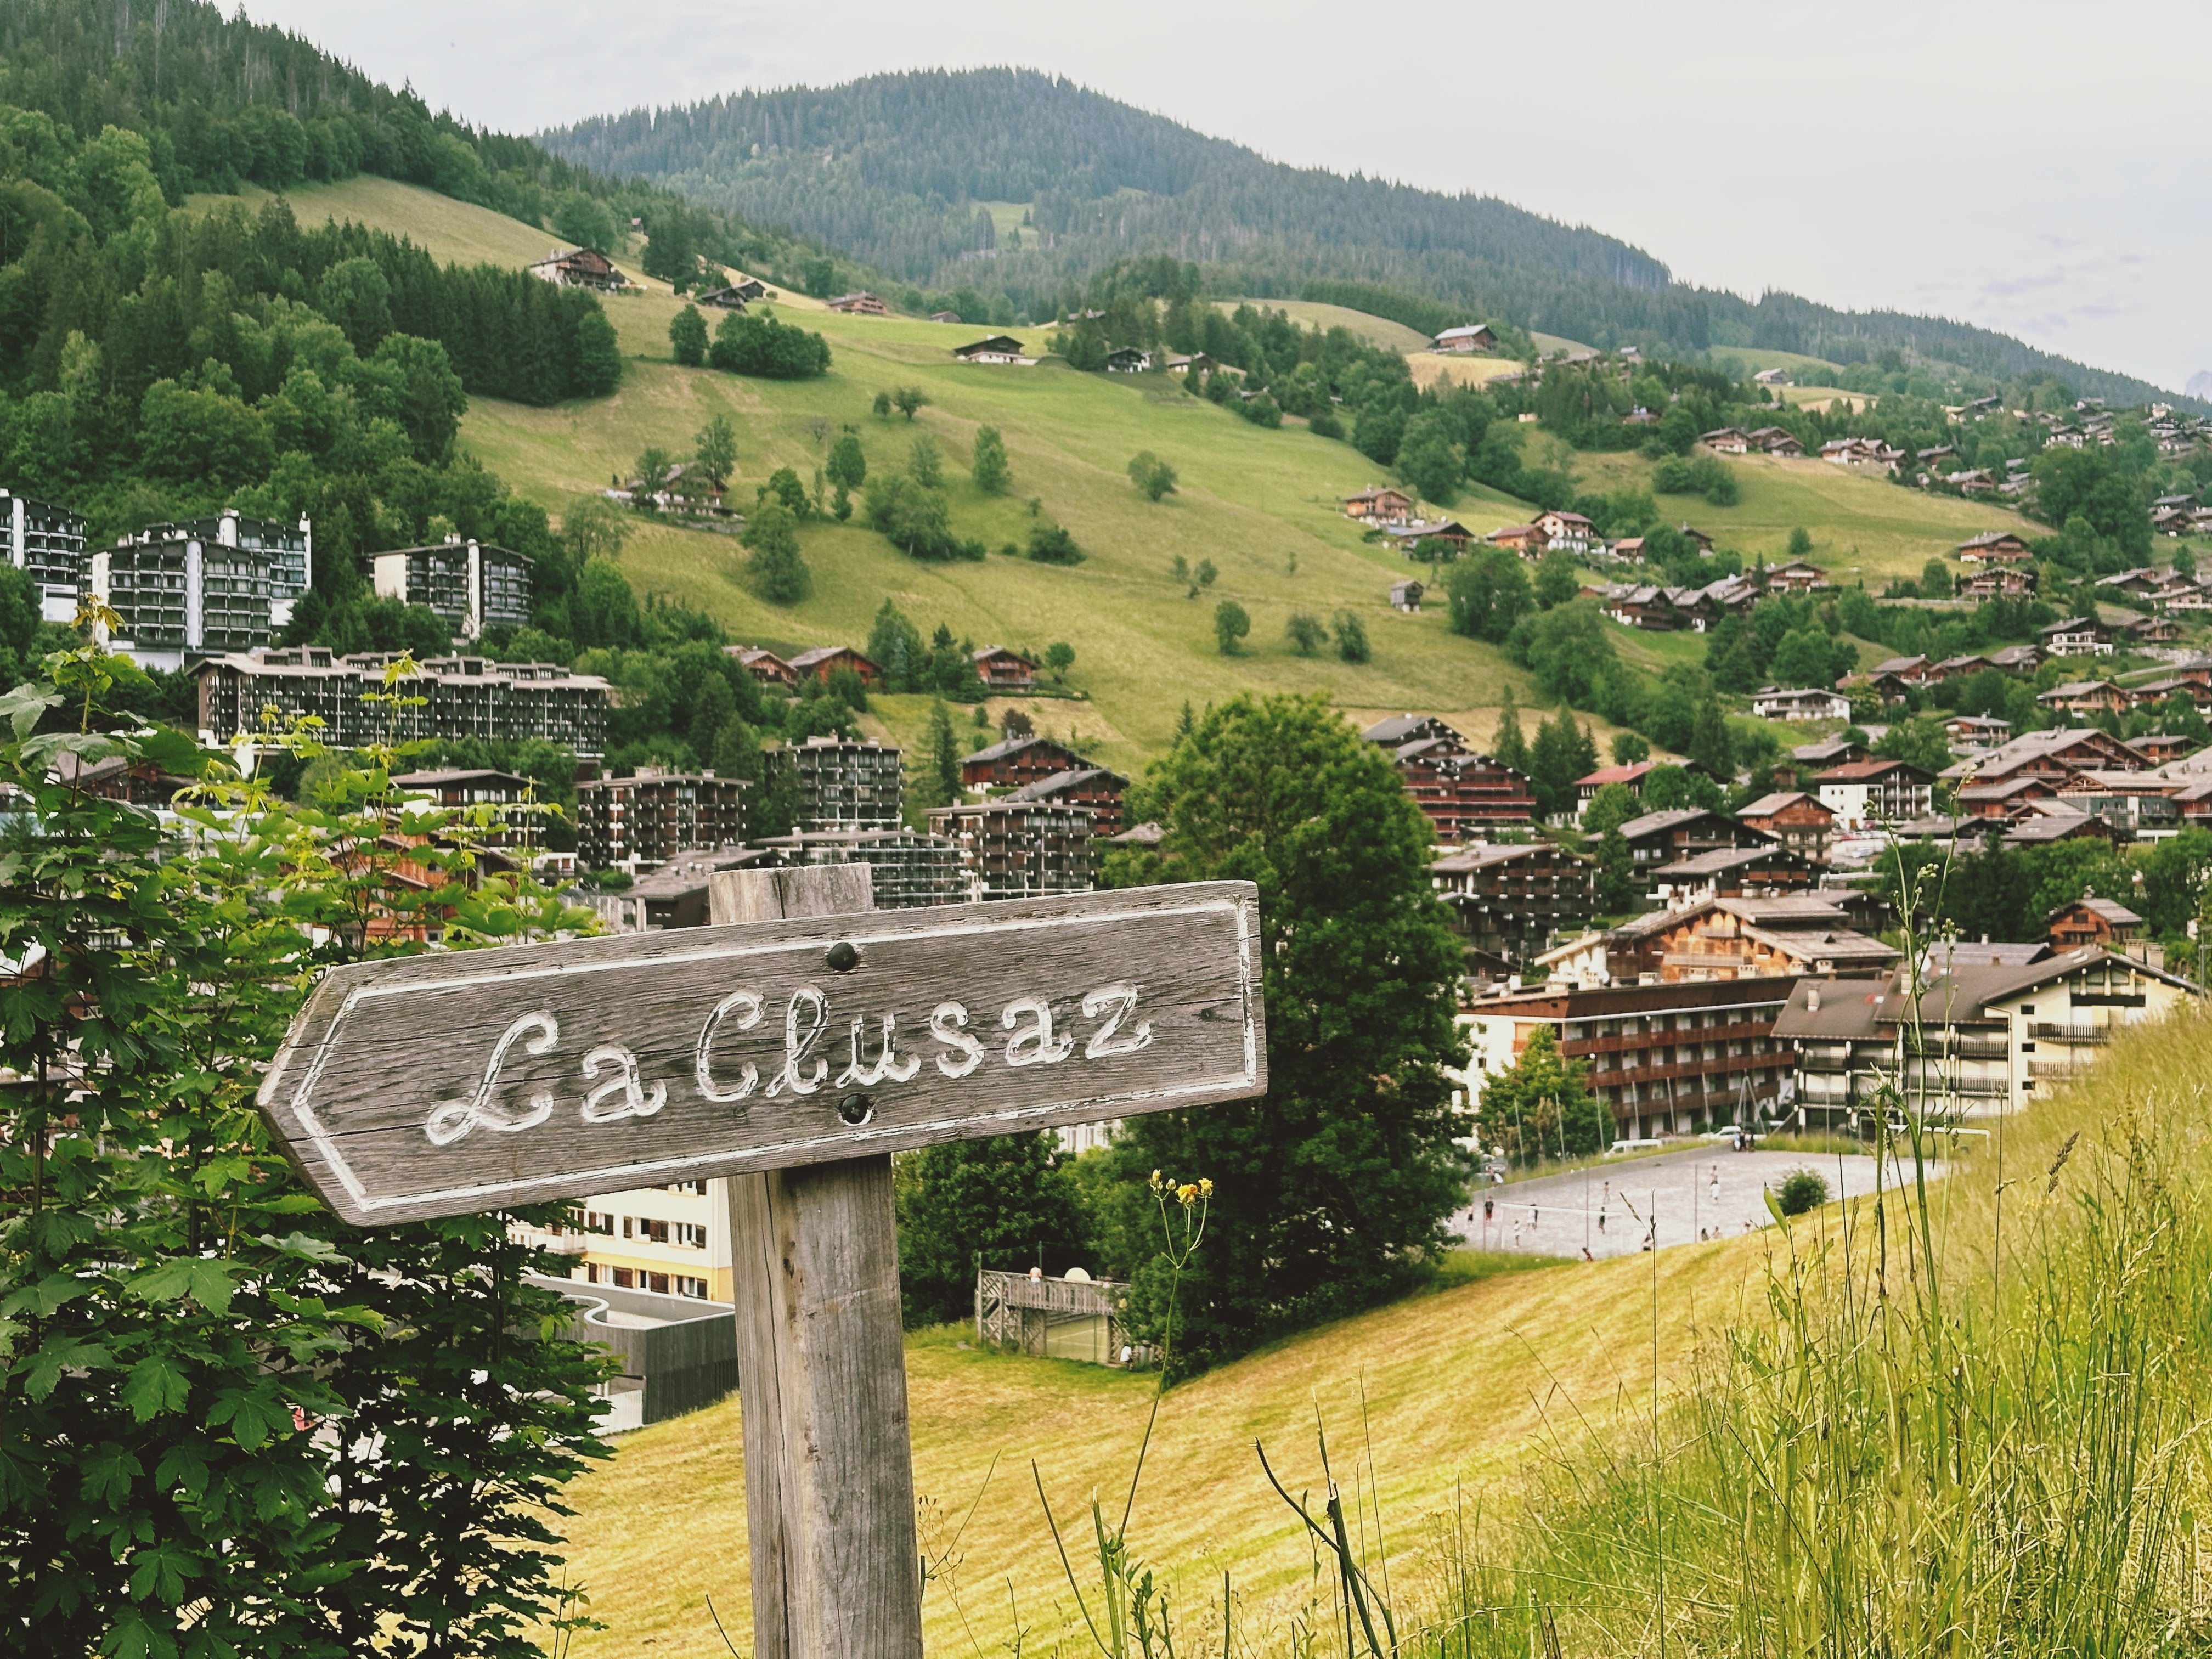 The ski resort of La Clusaz has a whole different look come summer